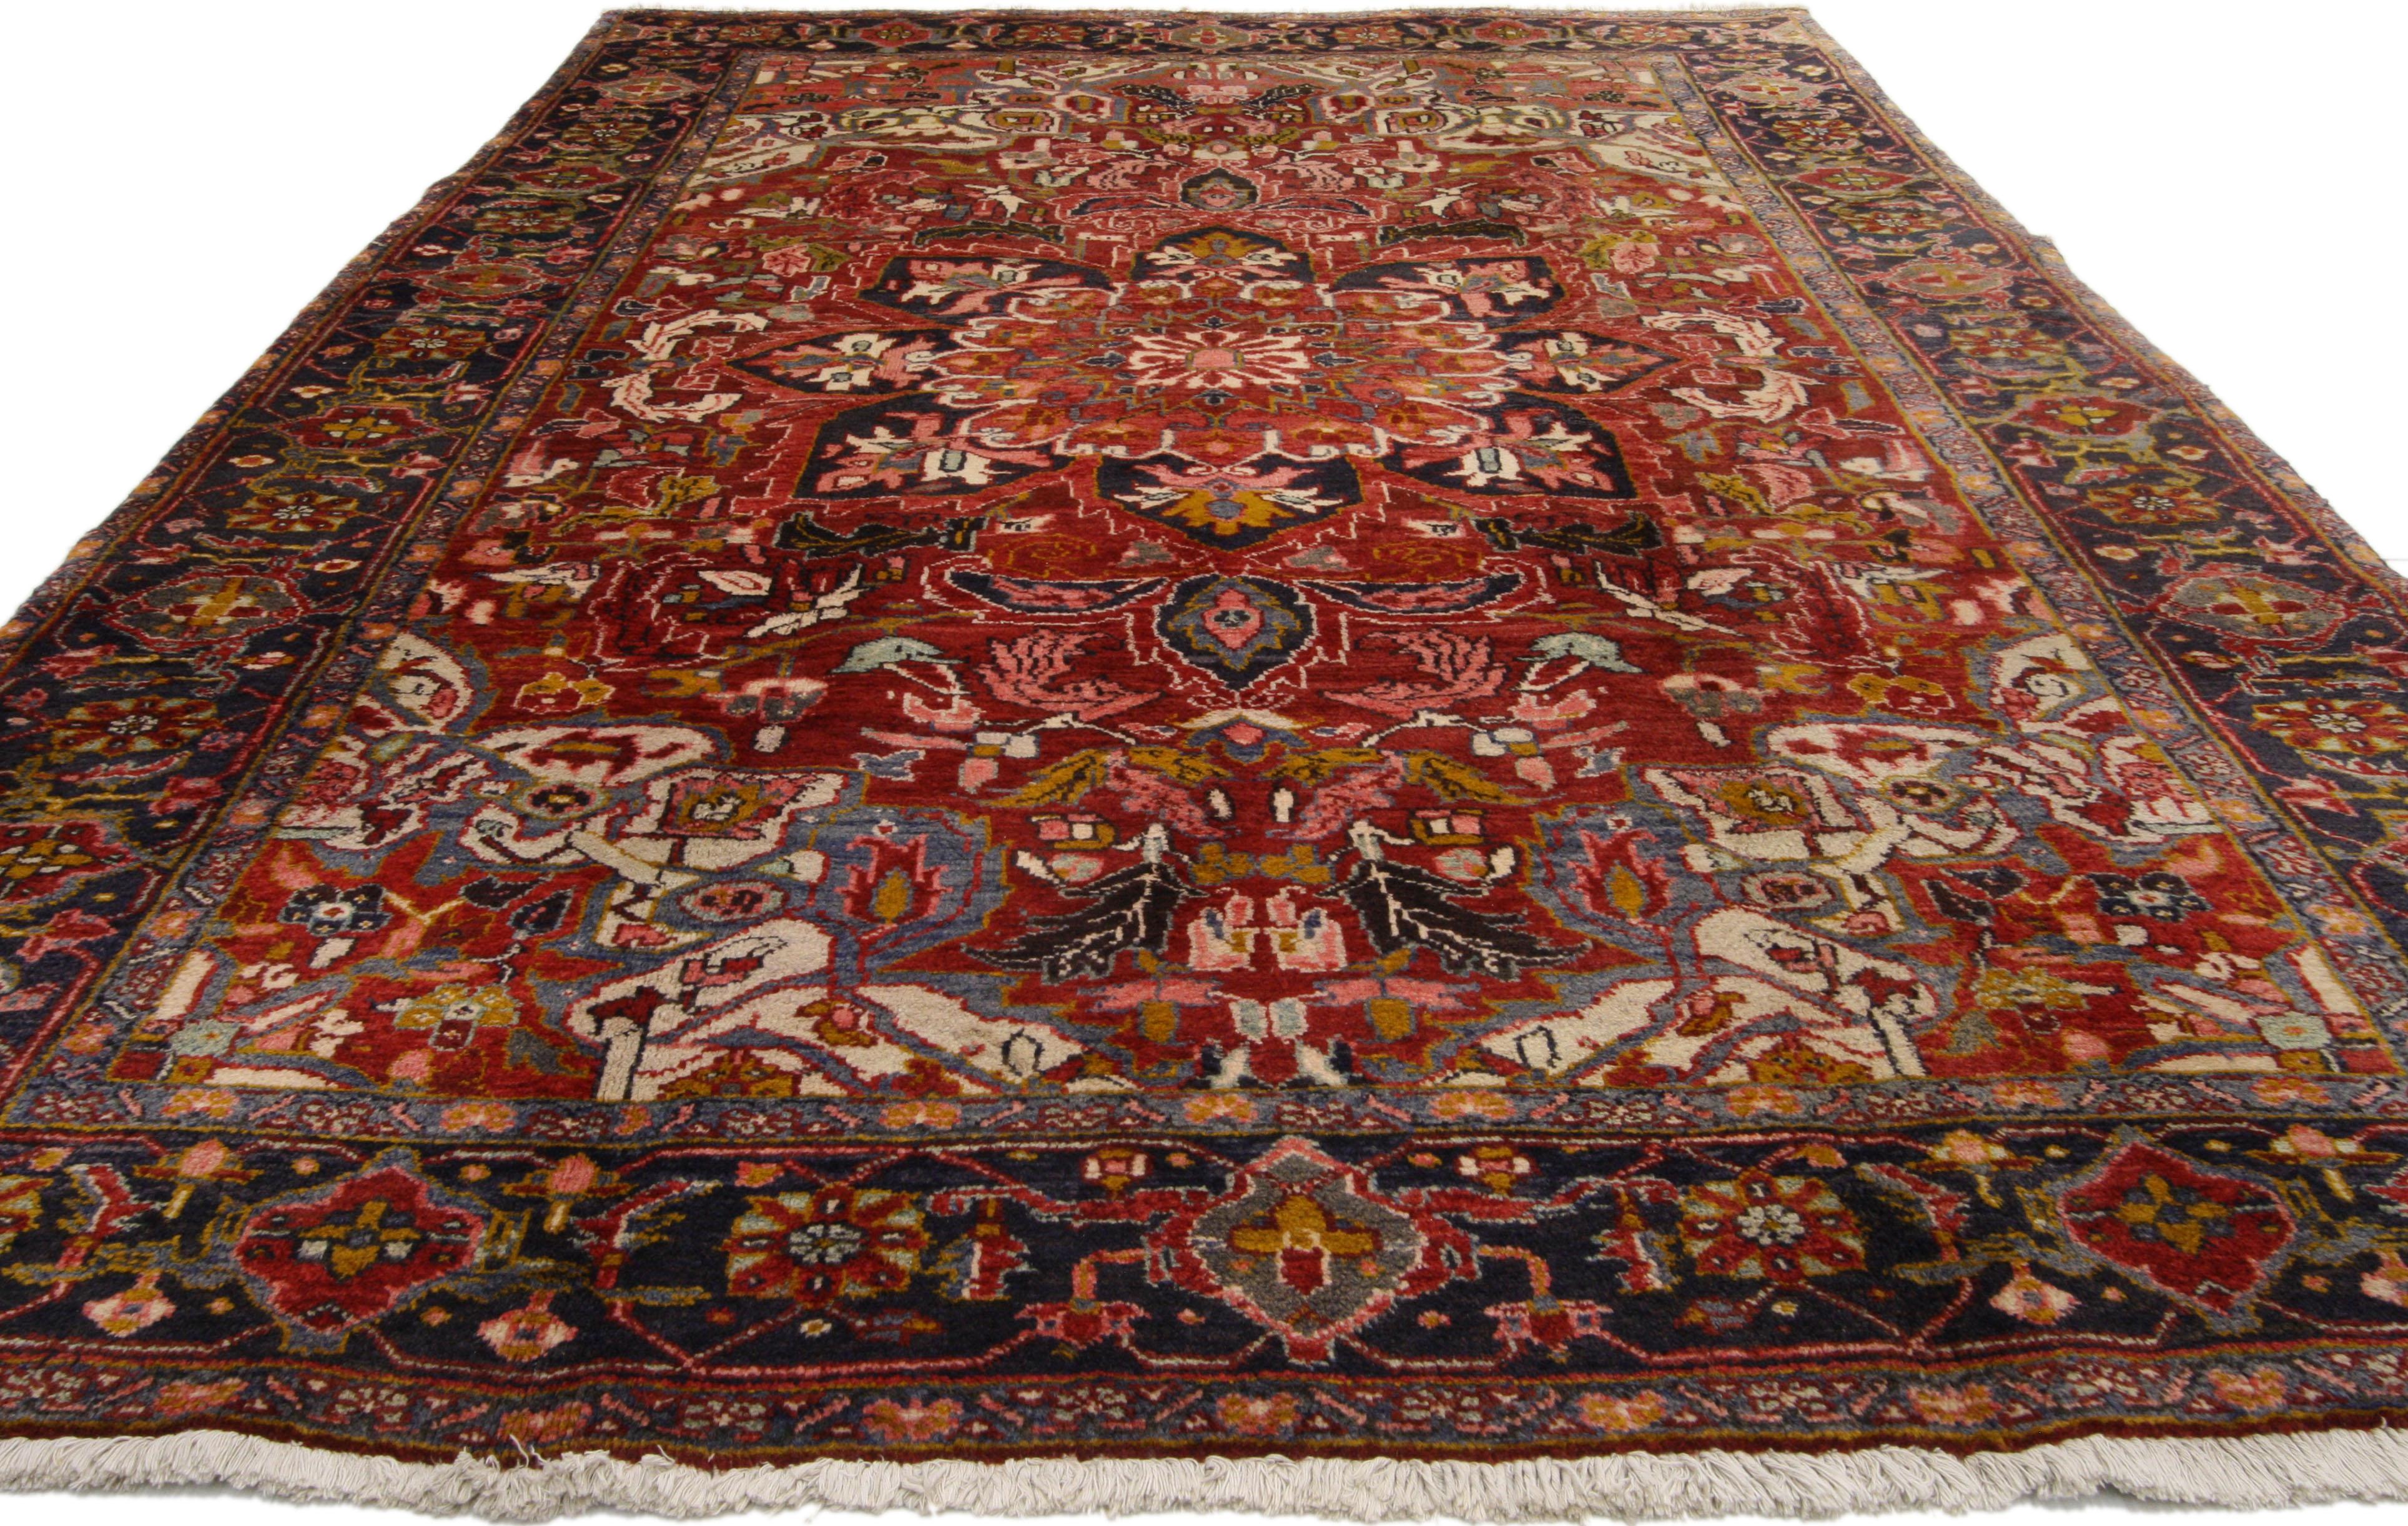 76223, vintage Persian Heriz rug with Mid-Century Modern style. Make a rich and dramatic statement while adding beauty and warmth to your home. This hand-knotted wool vintage Persian Heriz rug features a large floral center medallion surrounded by